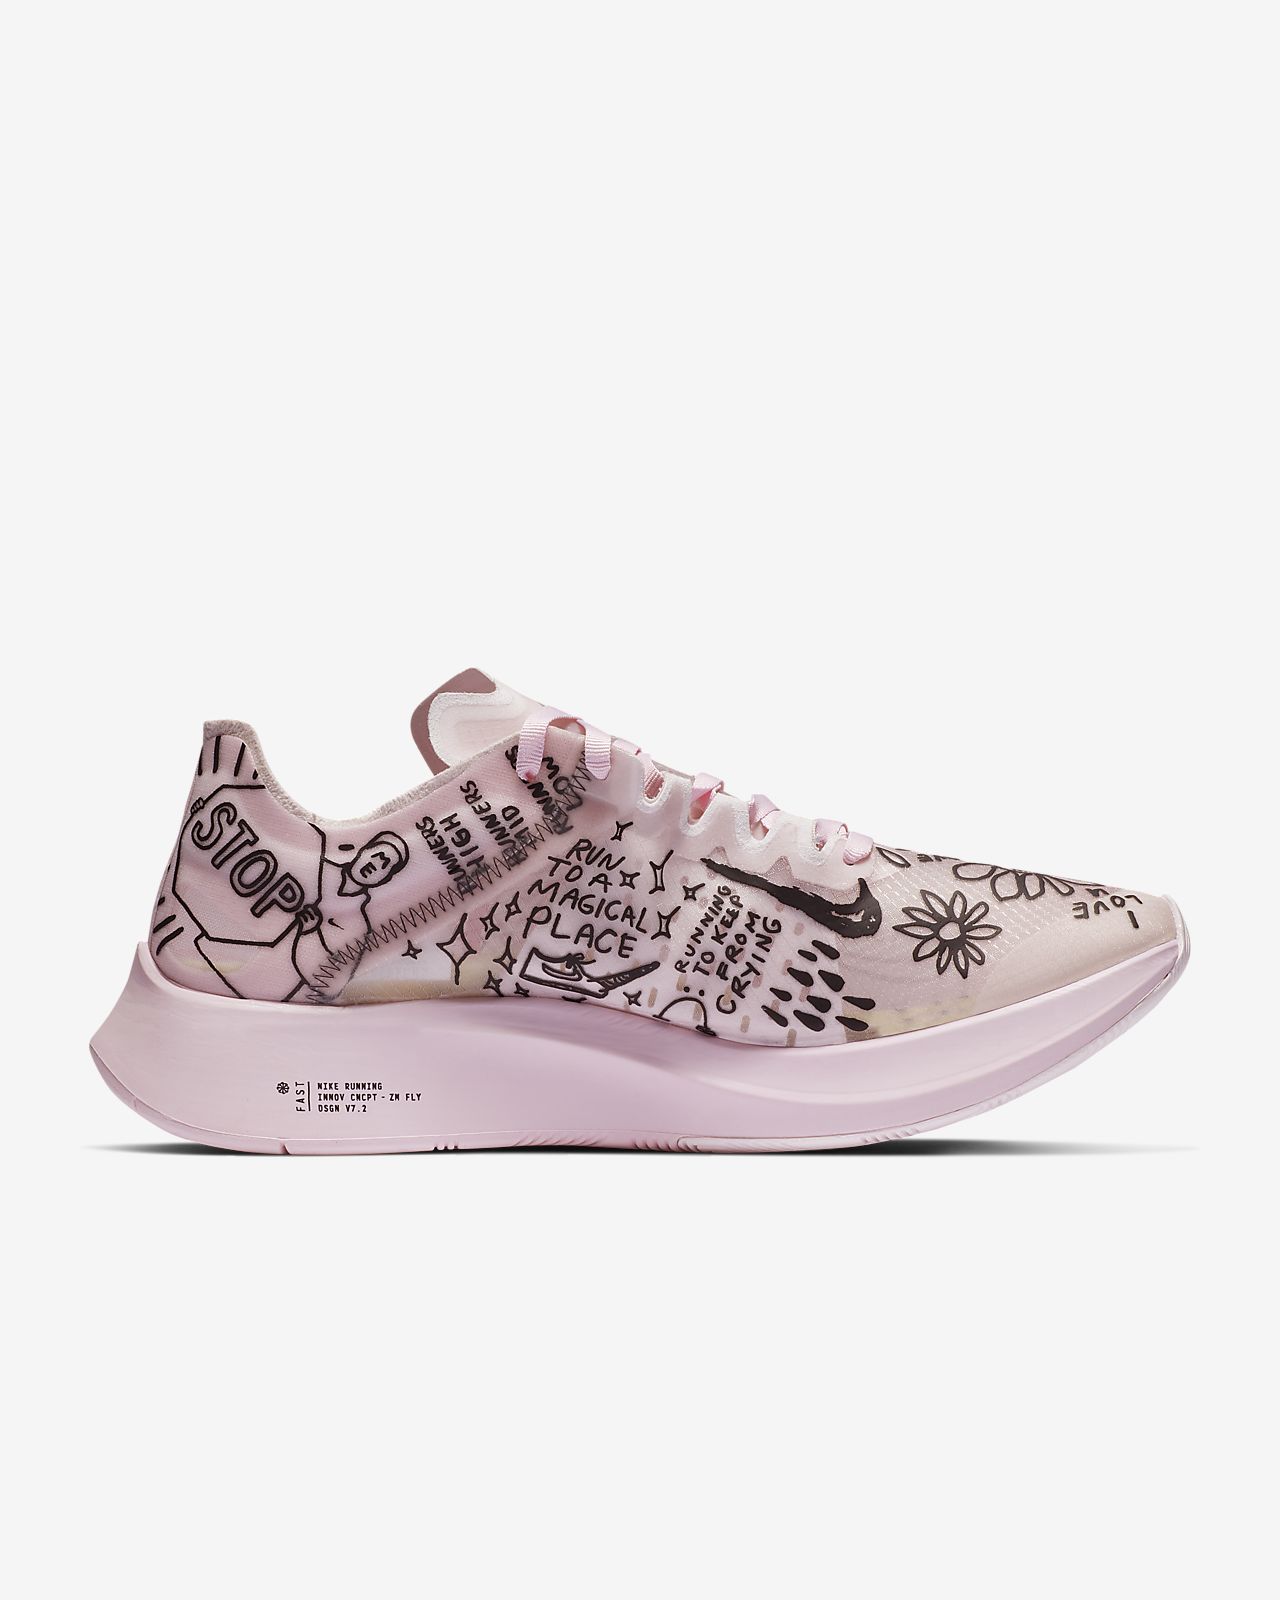 nike zoom fly sp fast nathan bell running shoe